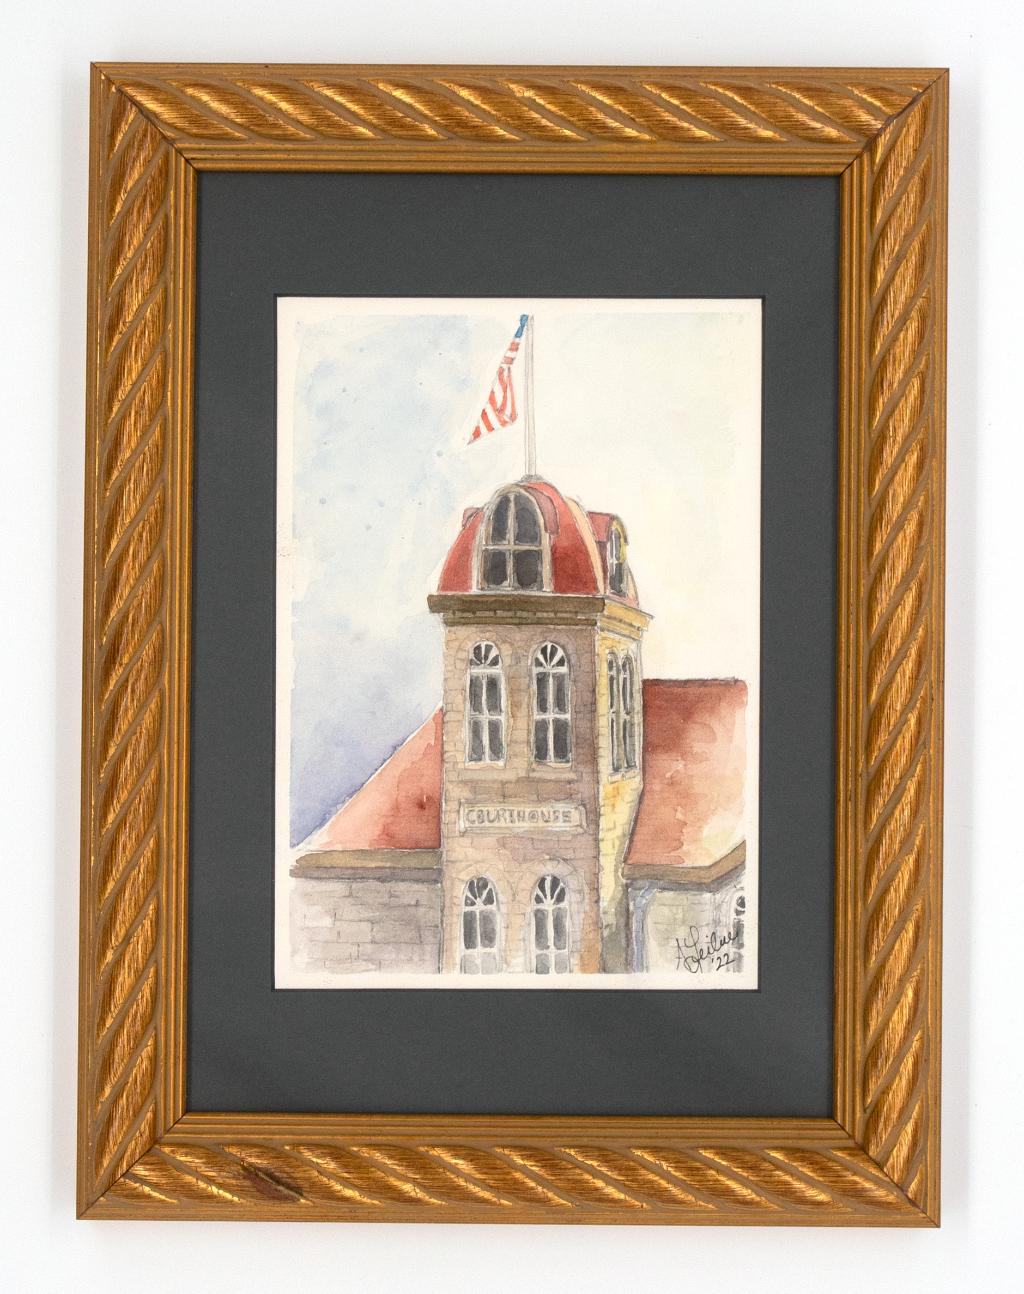 ''Carroll County Courthouse'' by Amber Leibee